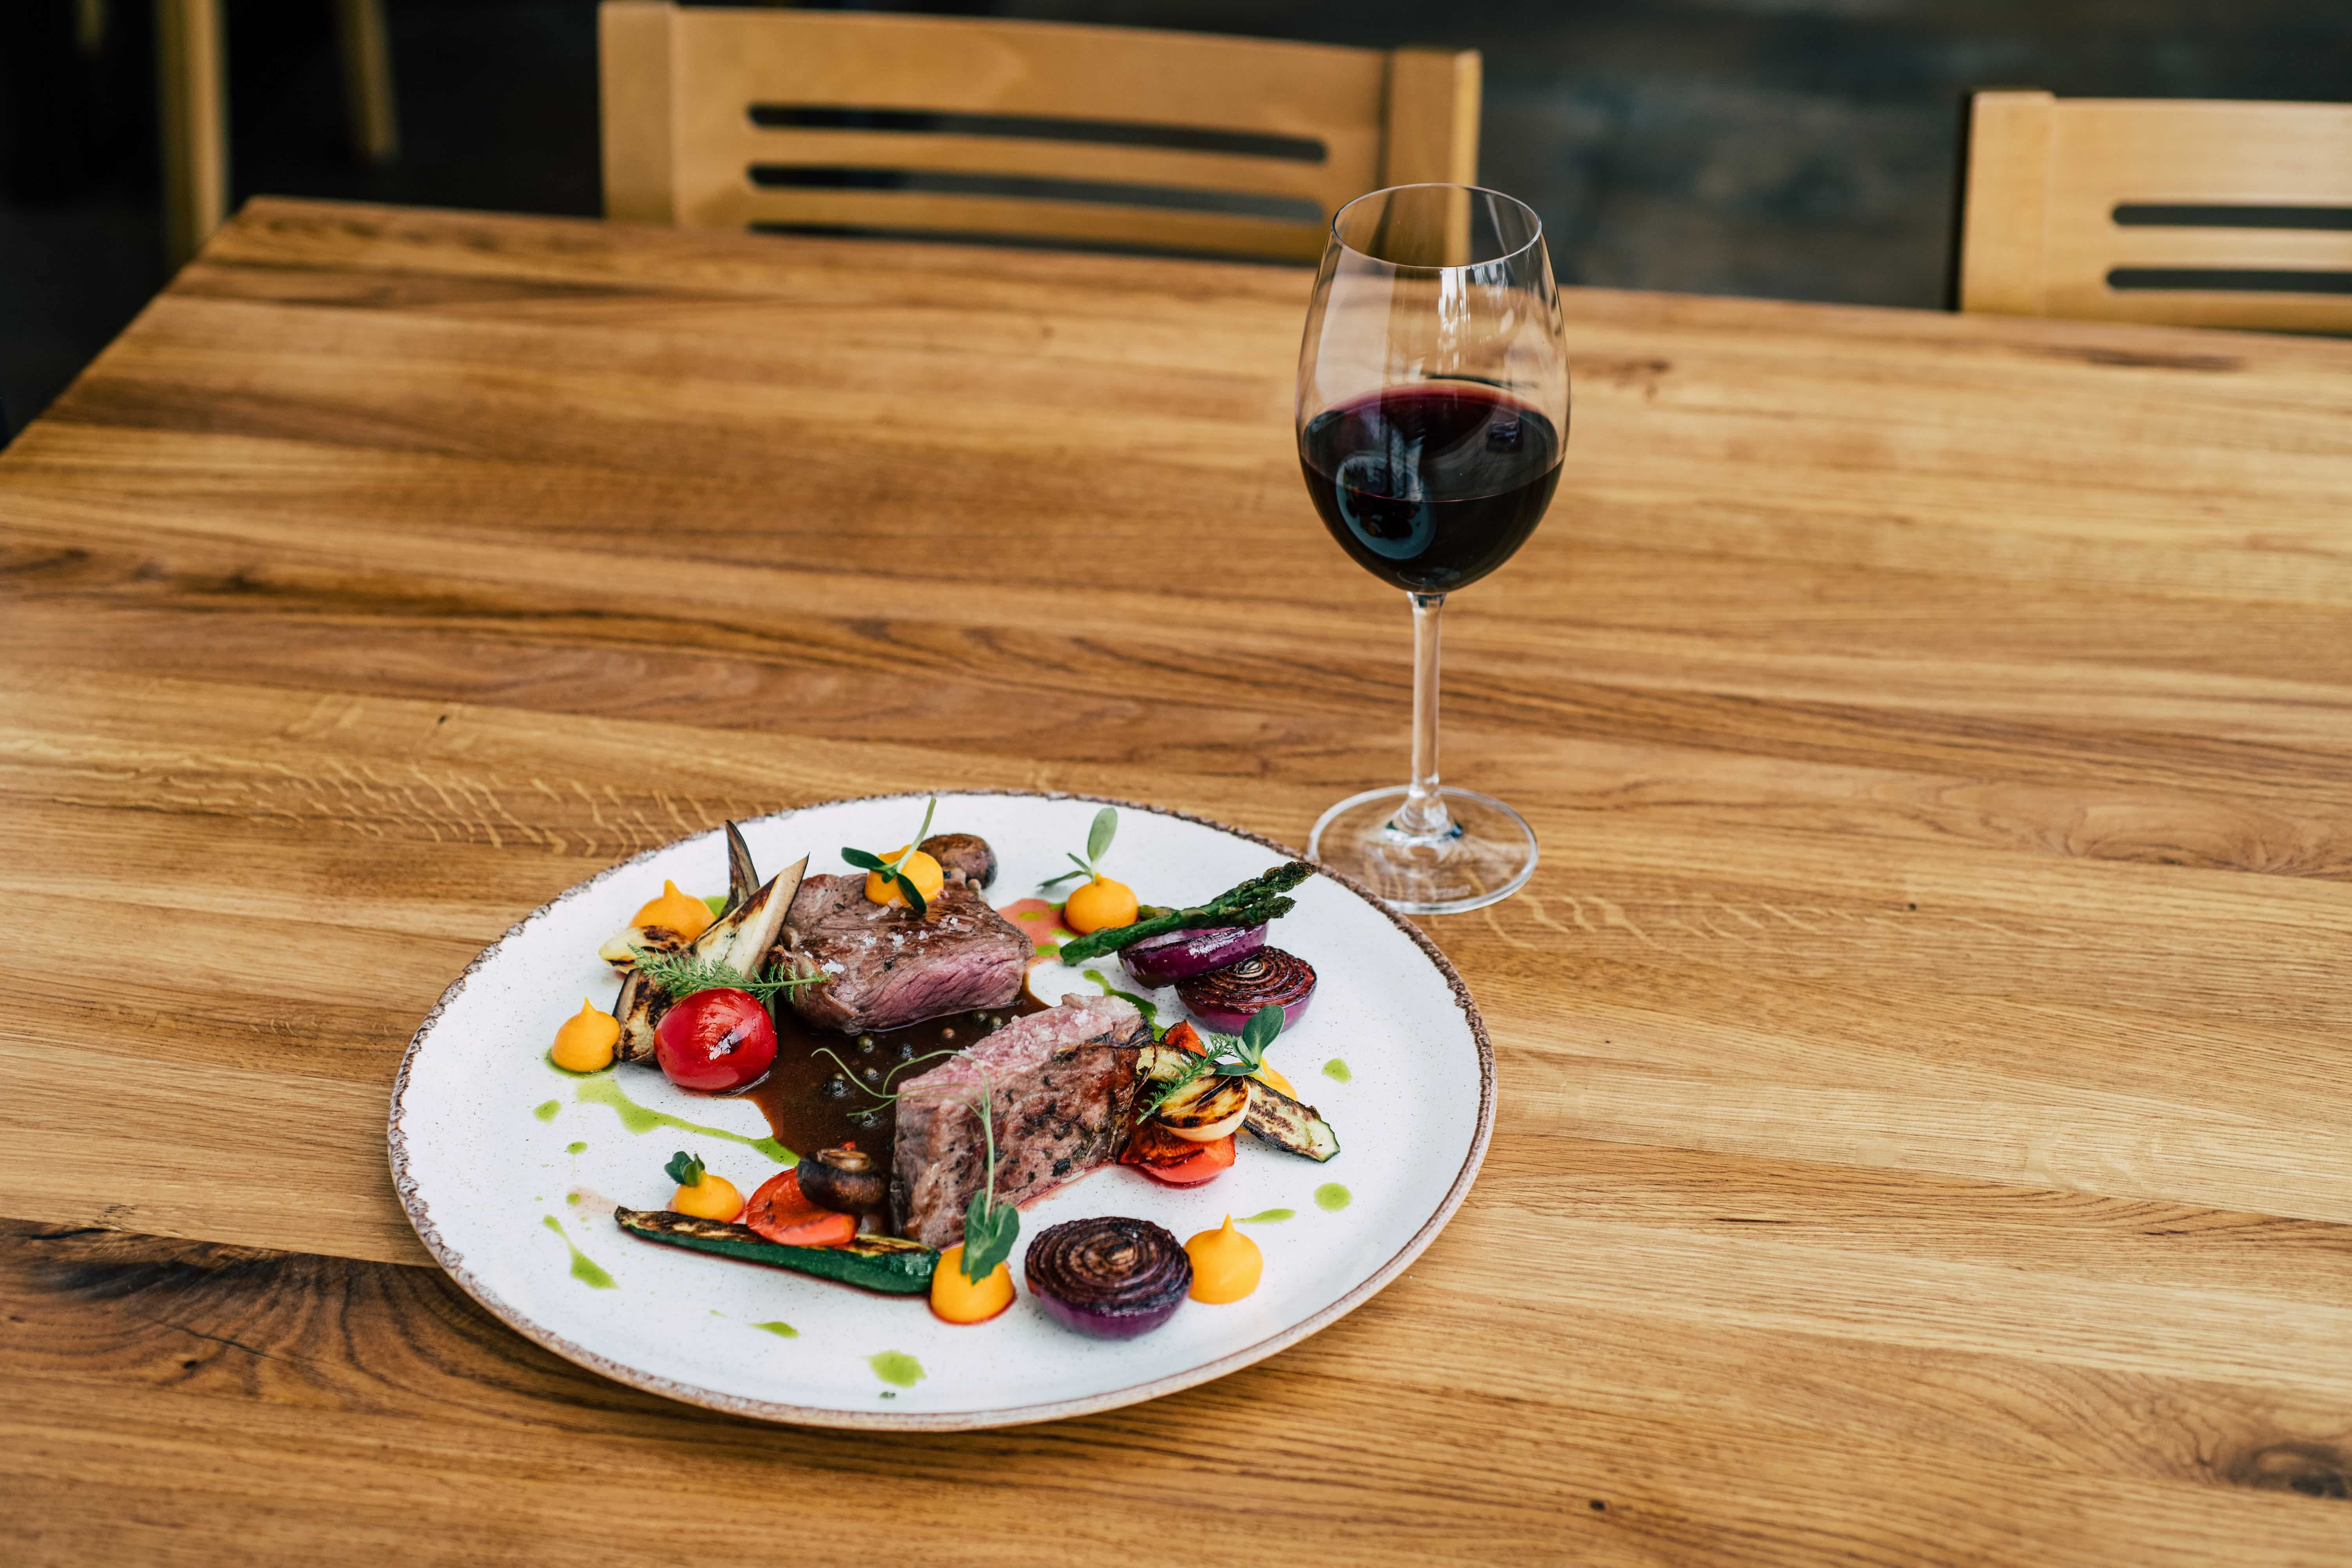 red wie, red meat, wine pairing, food choices